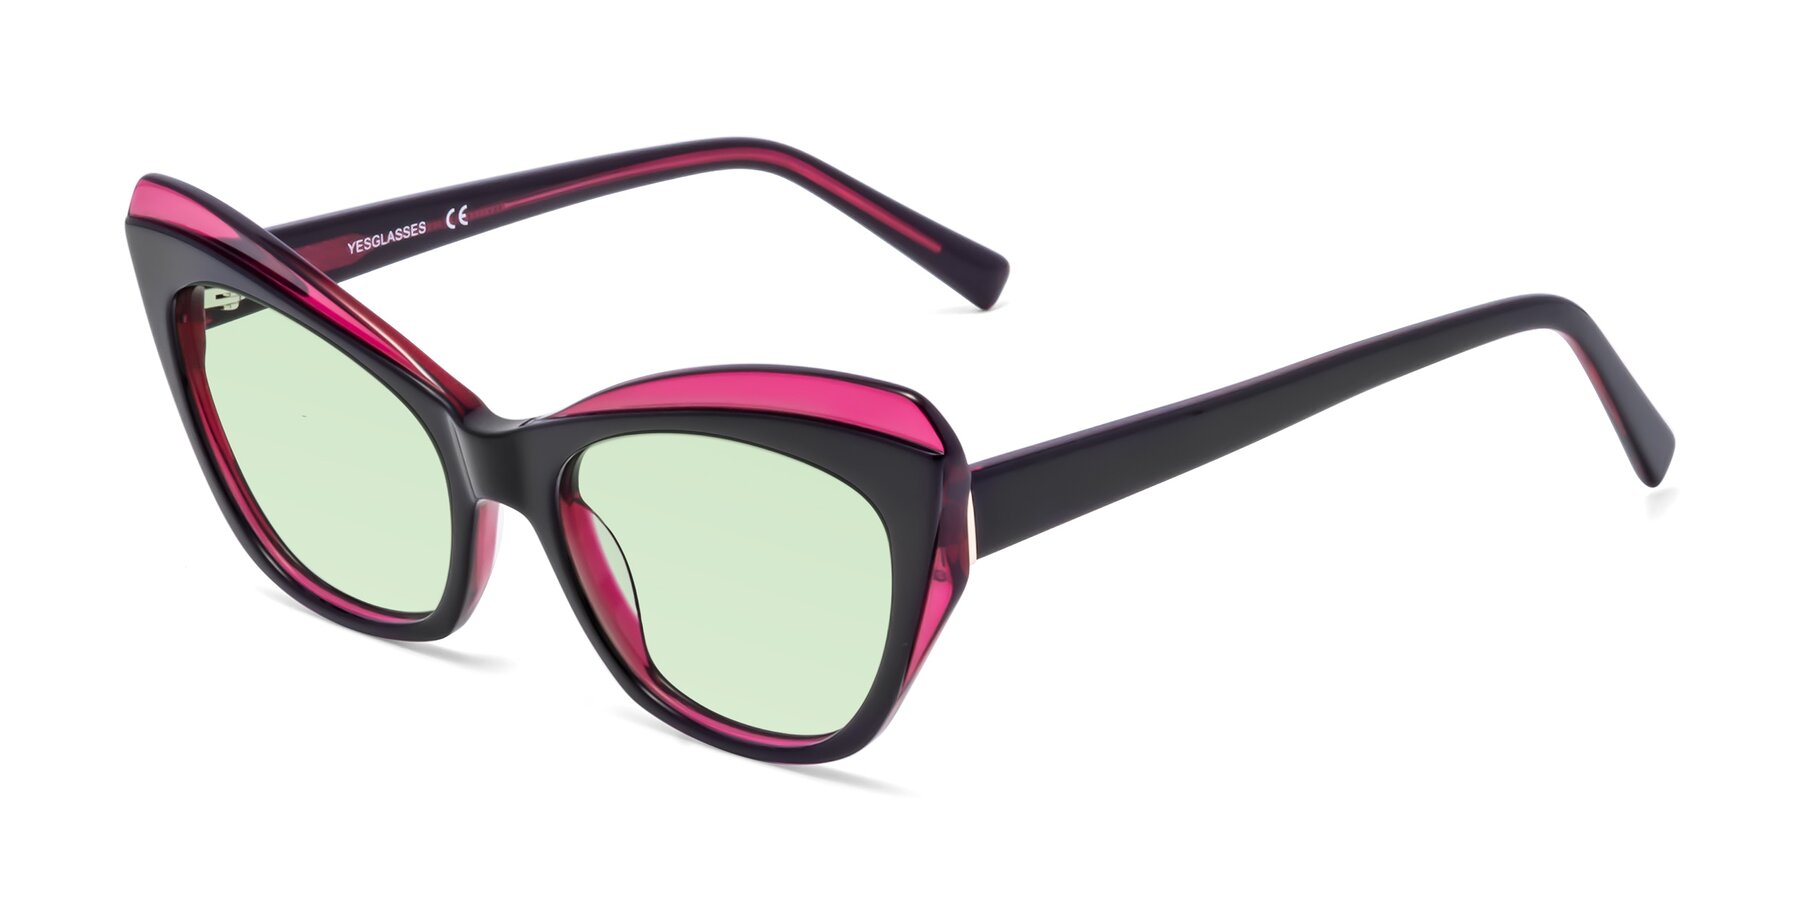 Angle of 1469 in Black-Plum with Light Green Tinted Lenses